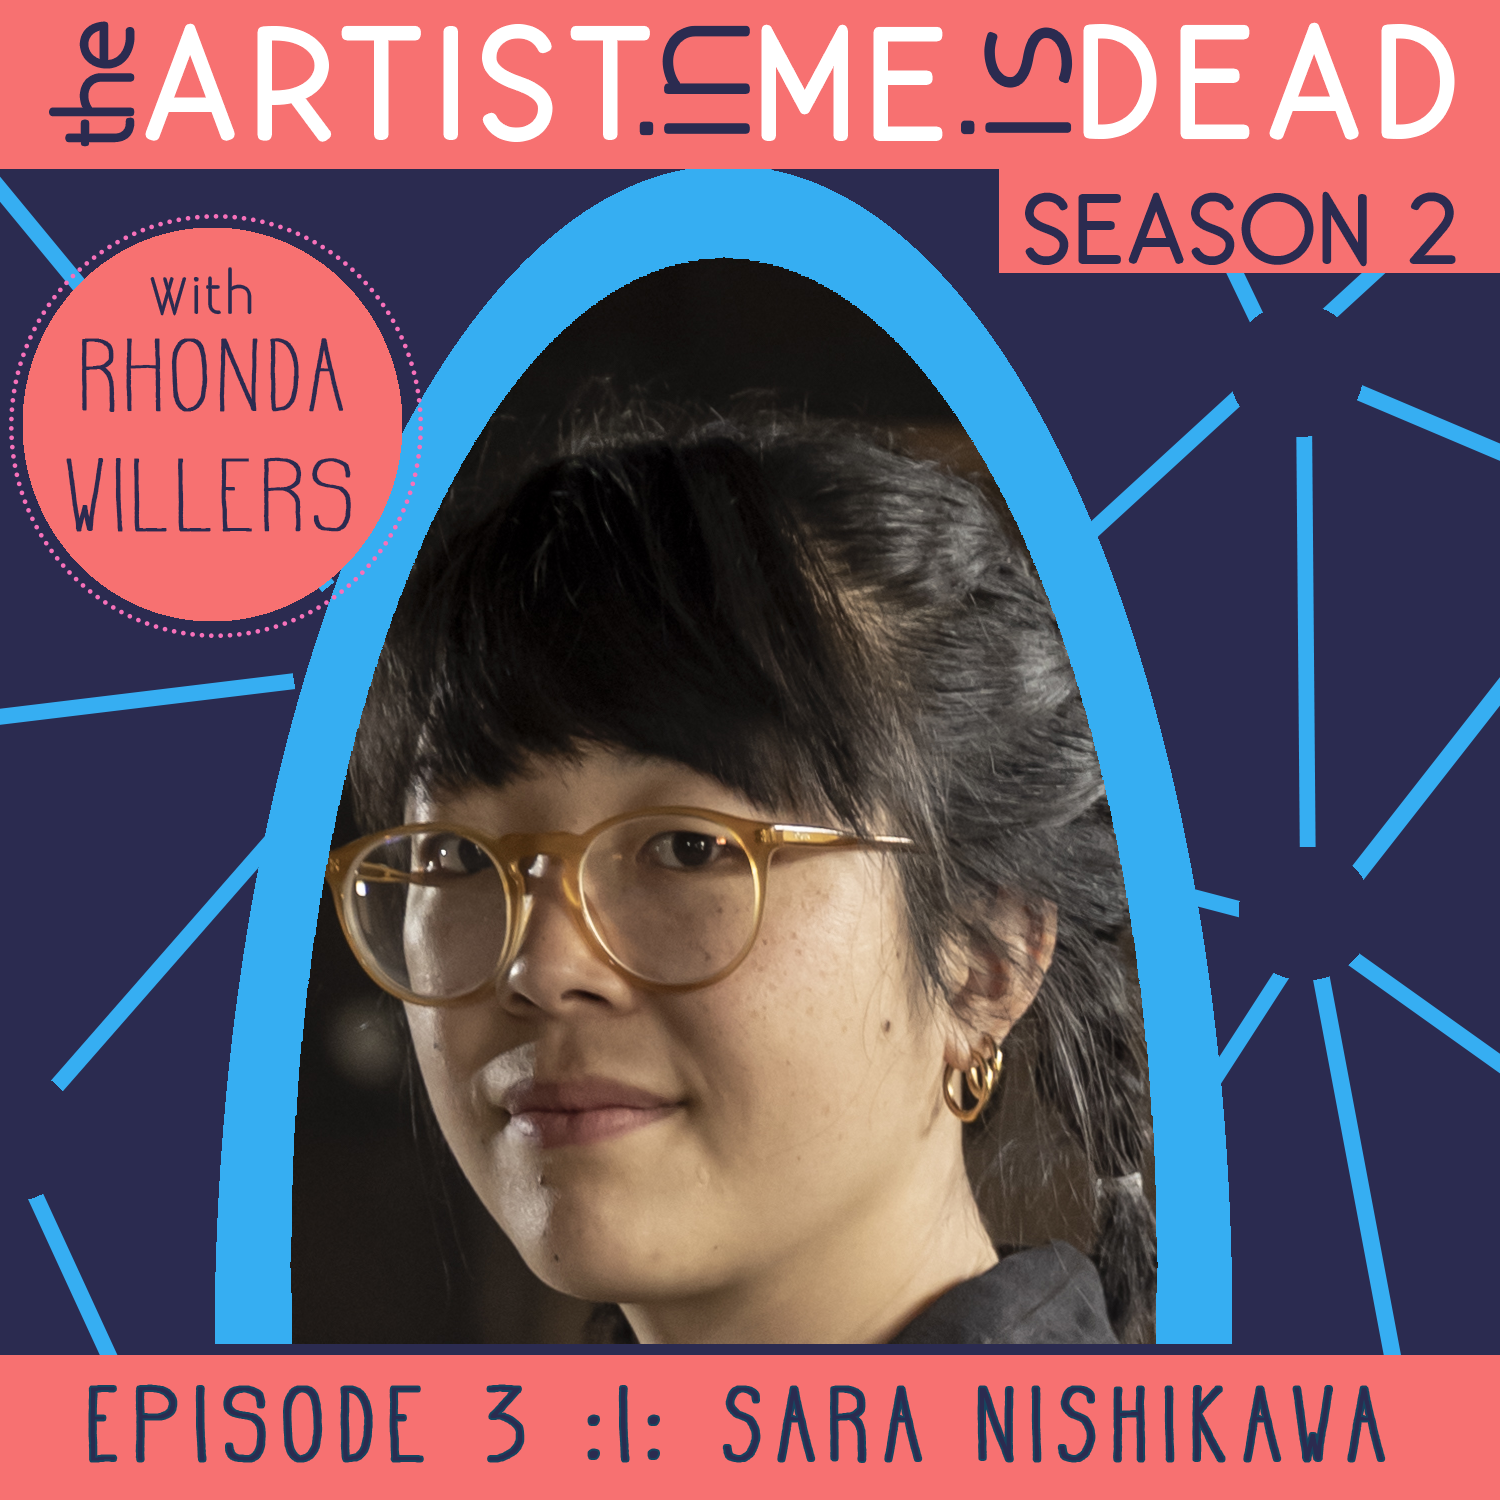 S2E3_Sara-Nishikawa_The-Artist-In-Me-Is-Dead-Podcast_IG_square.png